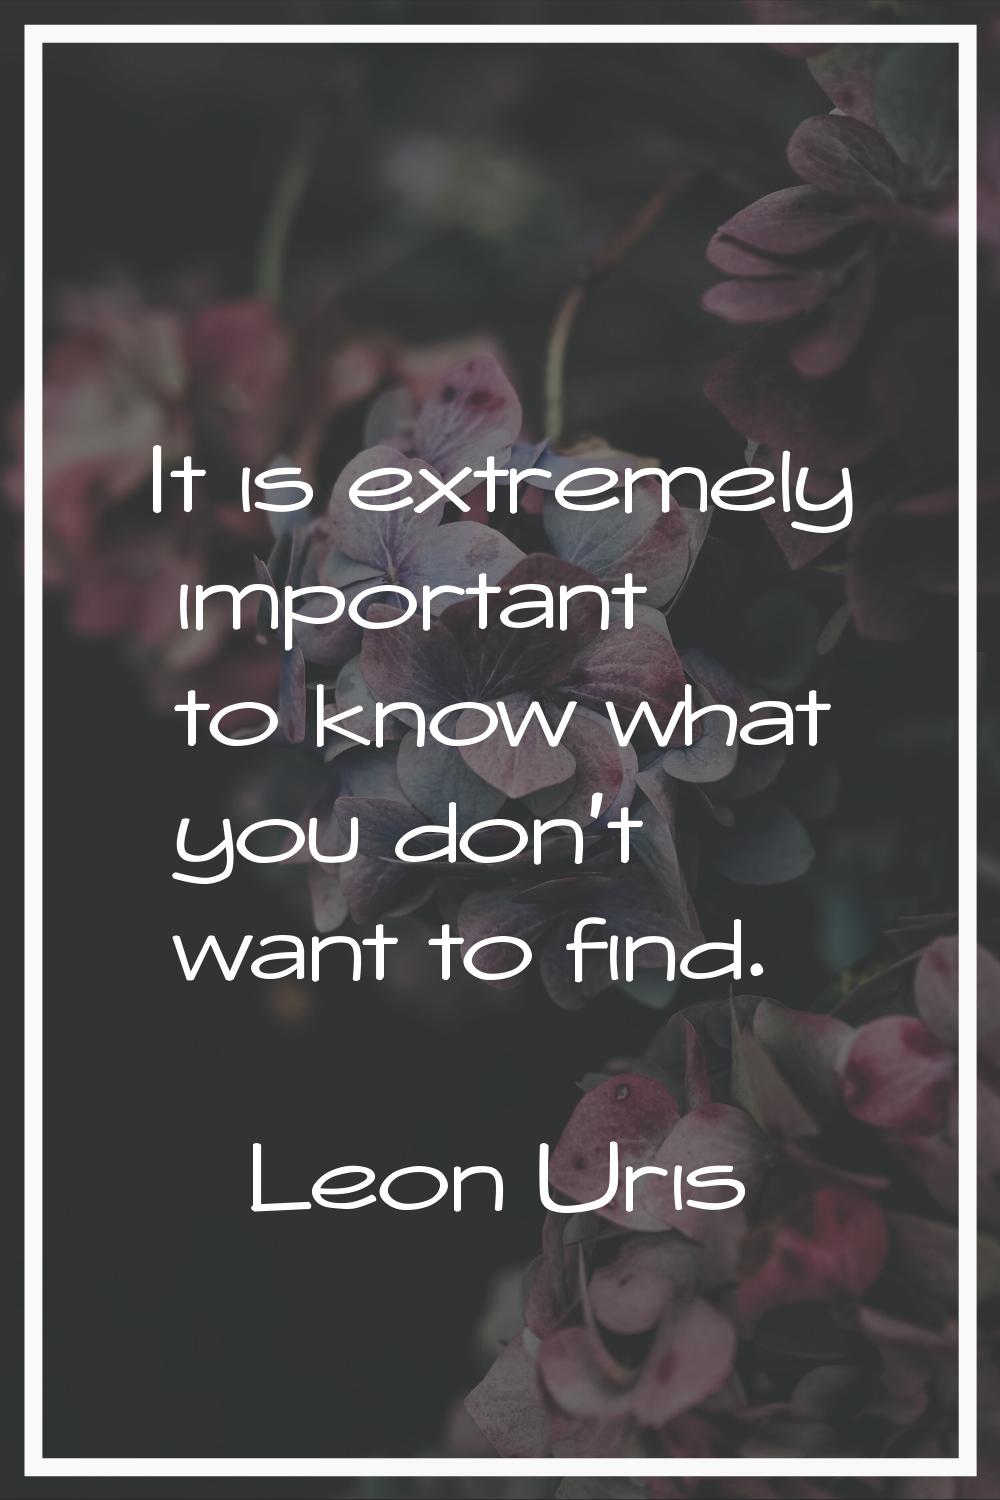 It is extremely important to know what you don't want to find.